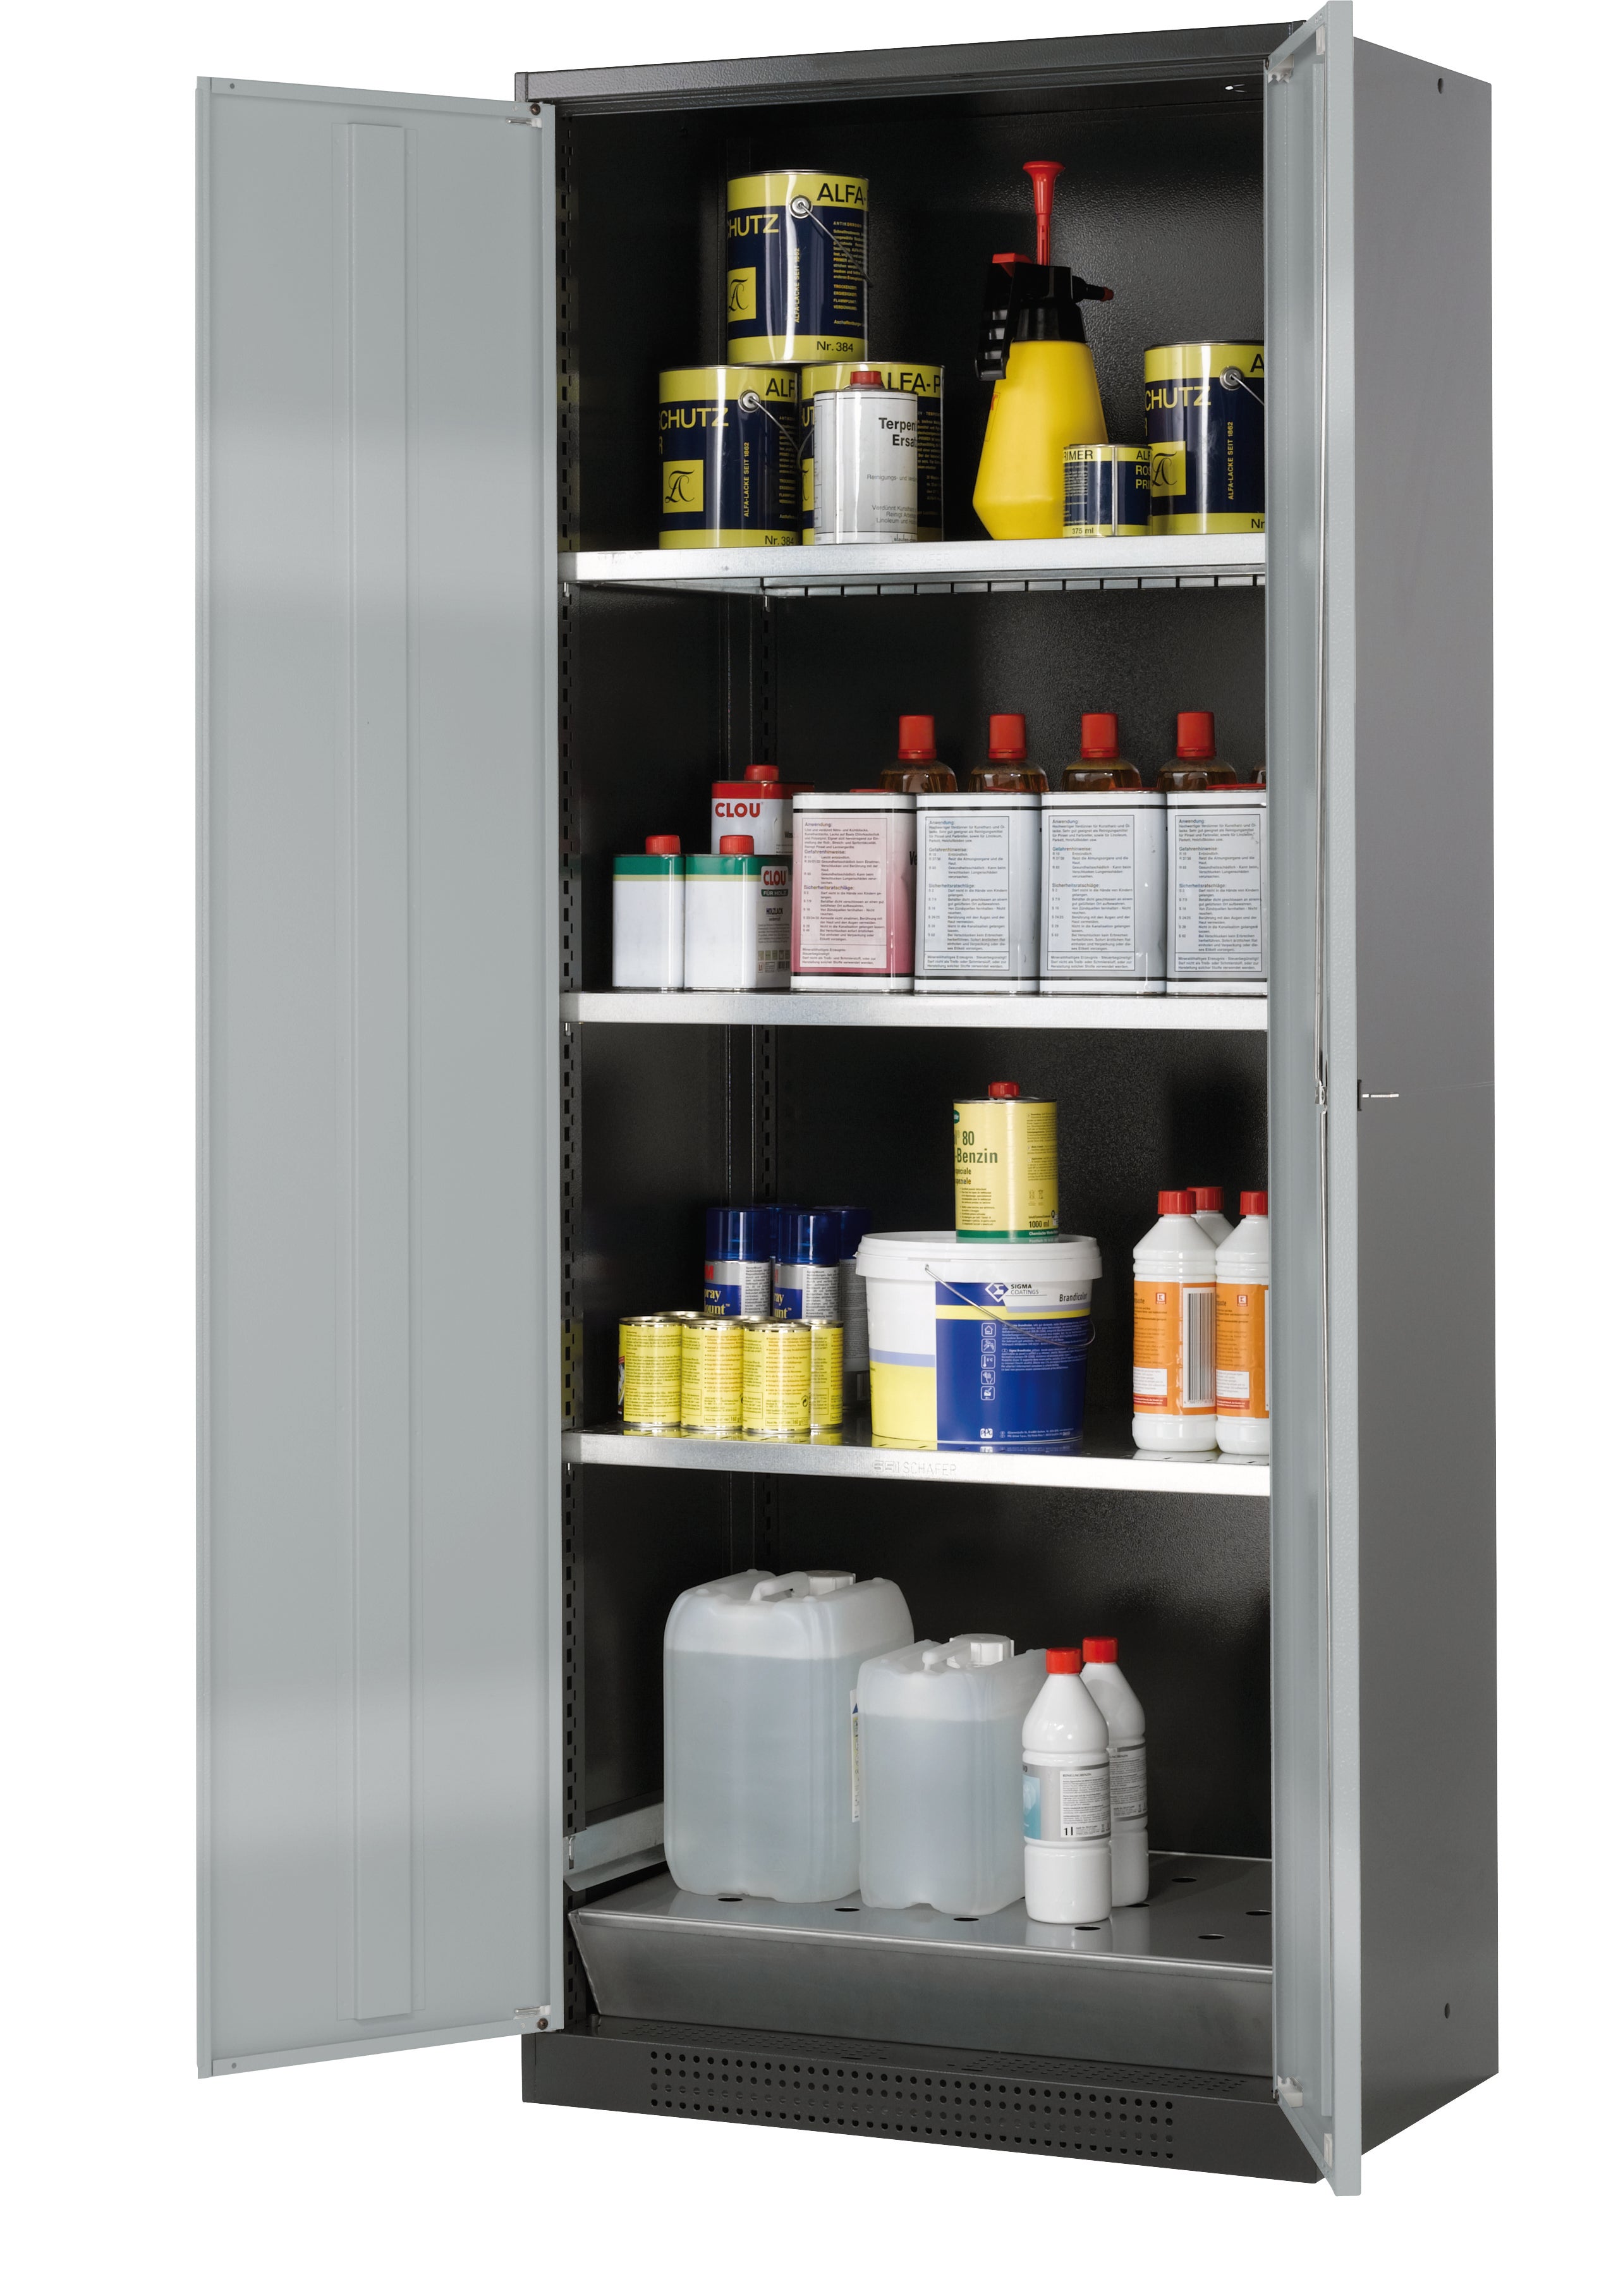 Chemical cabinet CS-CLASSIC model CS.195.081 in asecos silver with 3x standard shelves (sheet steel)